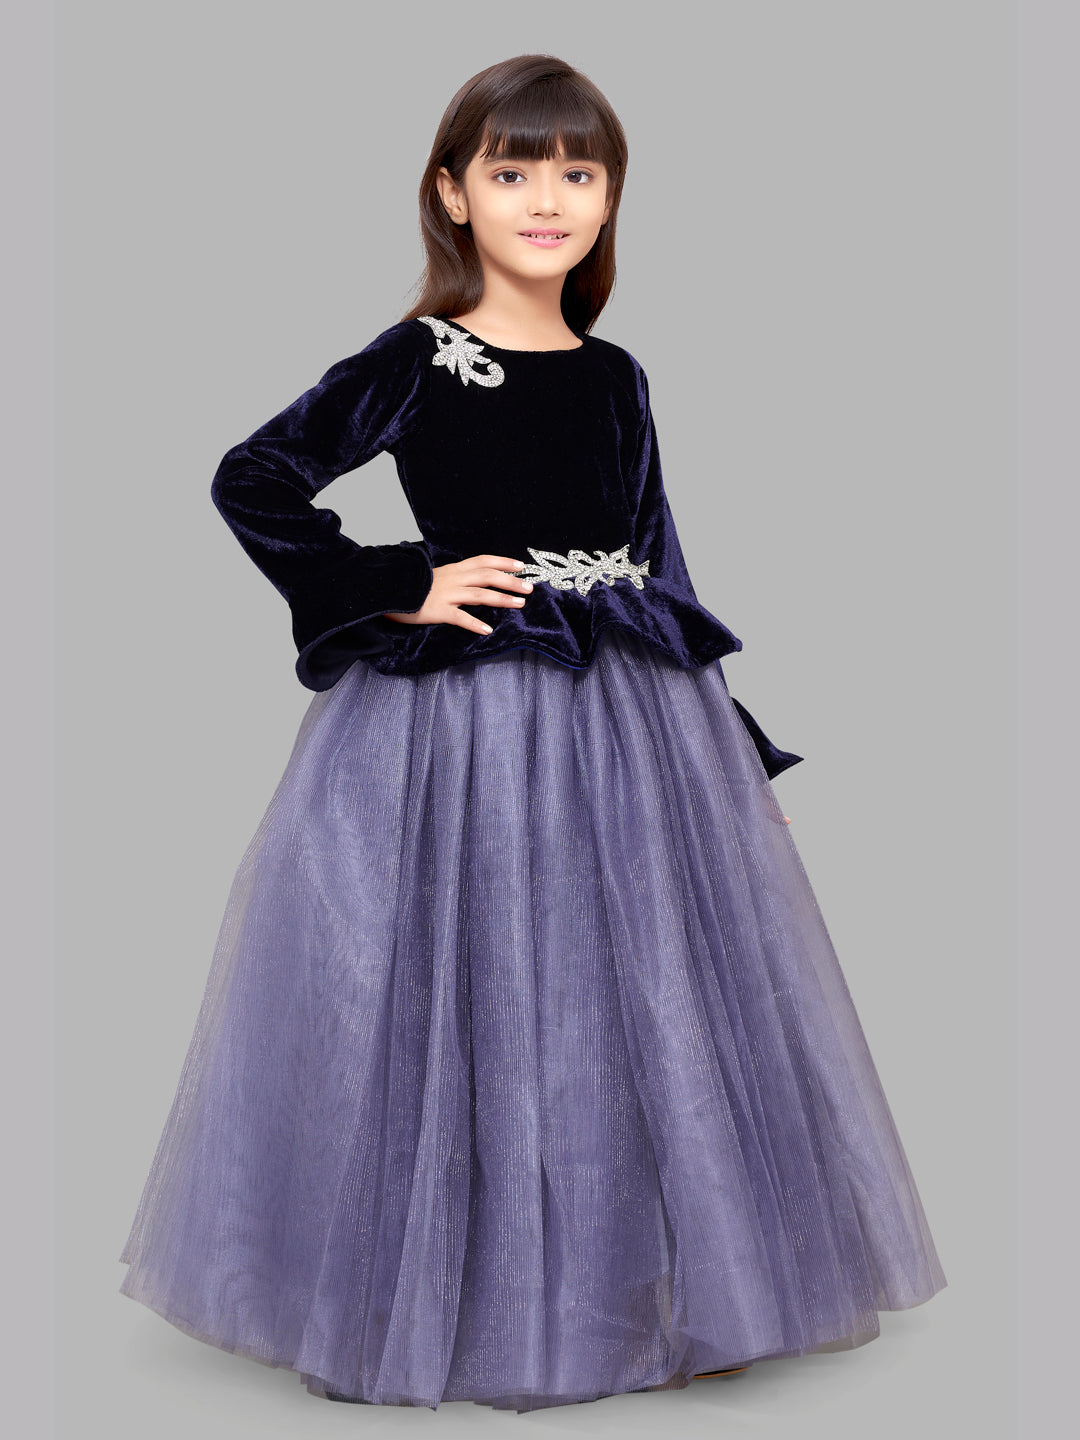 Burgundy Velvet Off Shoulder Flower Girl Dress With Lace Up Back Perfect  For Parties, Weddings, And African Wednings Cute And Elegant Ball Gown For  Little Girls From Lovemydress, $61.13 | DHgate.Com